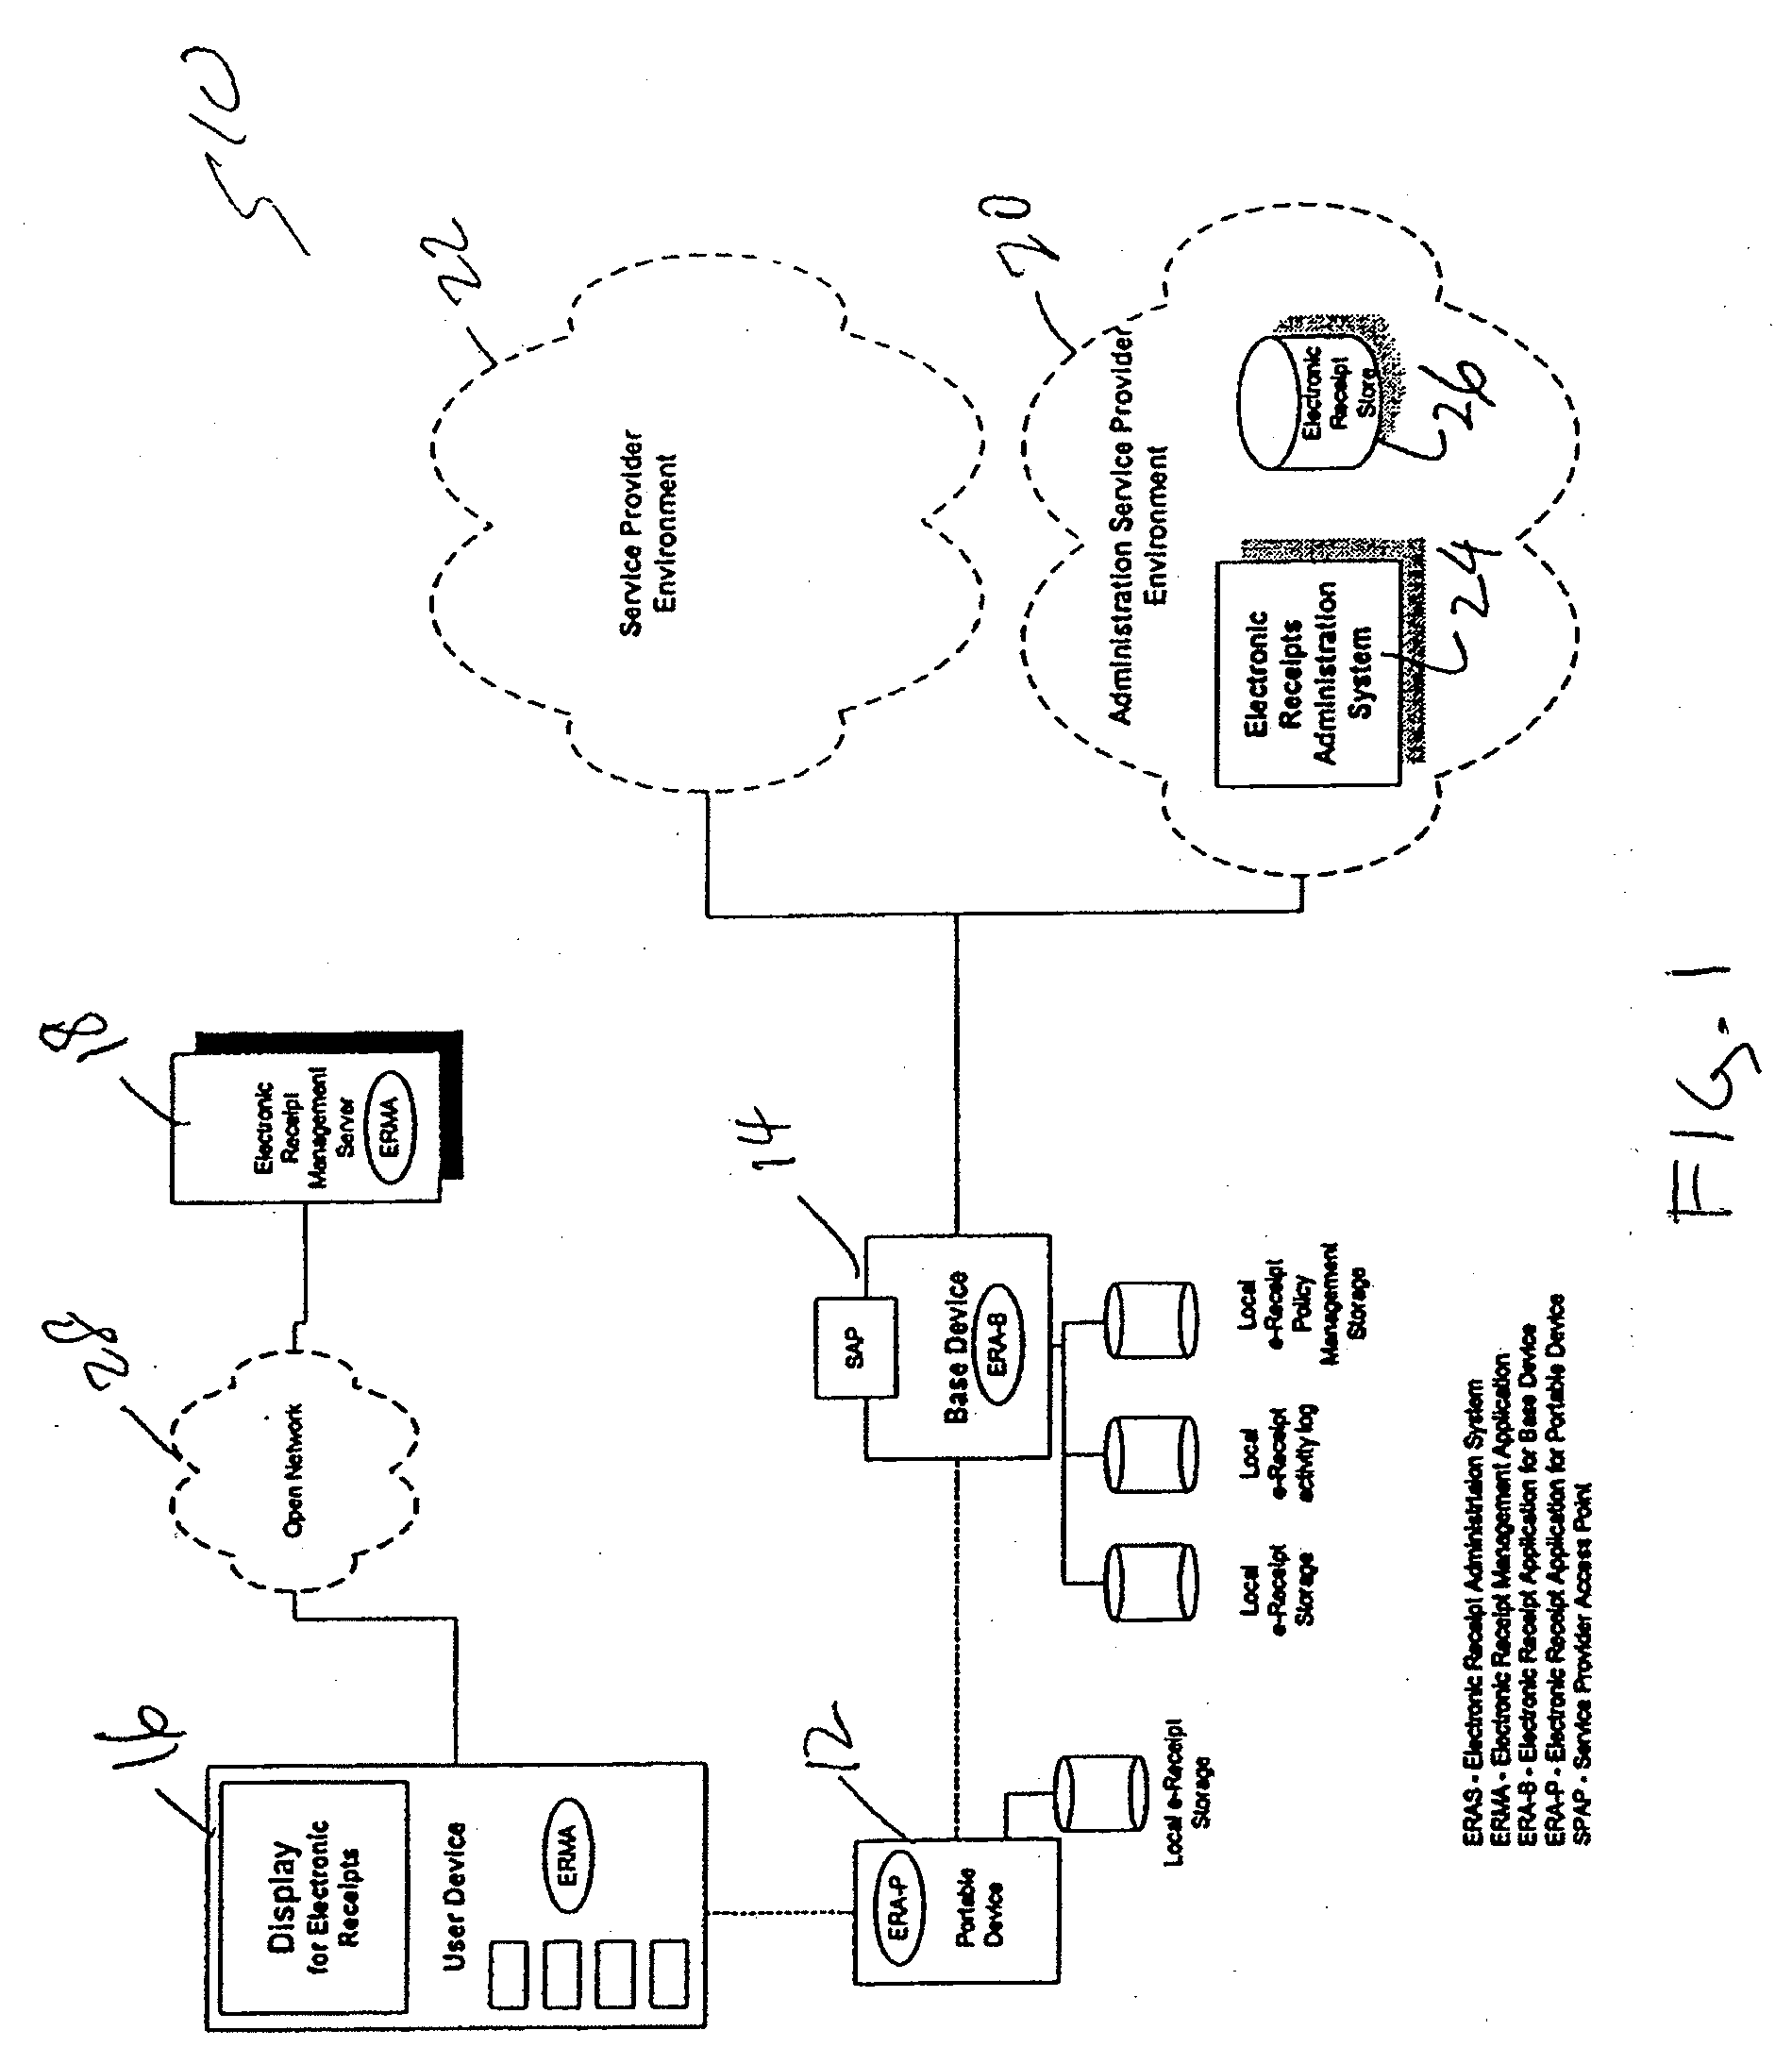 Method and Portable Device for Management of Electronic Receipts